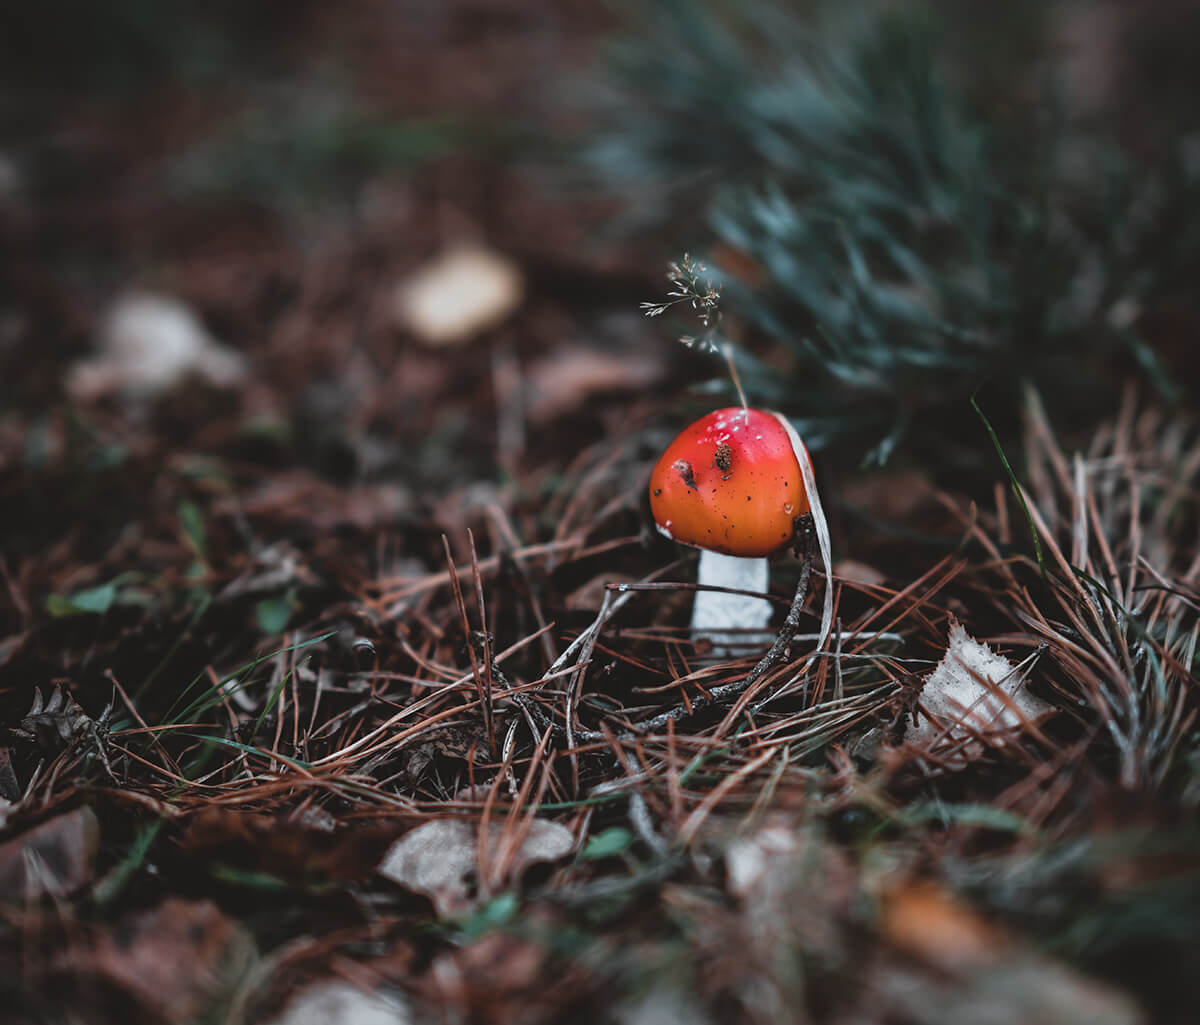 fly agaric mushroom in a pine wood for We Are Stardust's Rewild Your Soul programme, taken by Annie Spratt for Unsplash